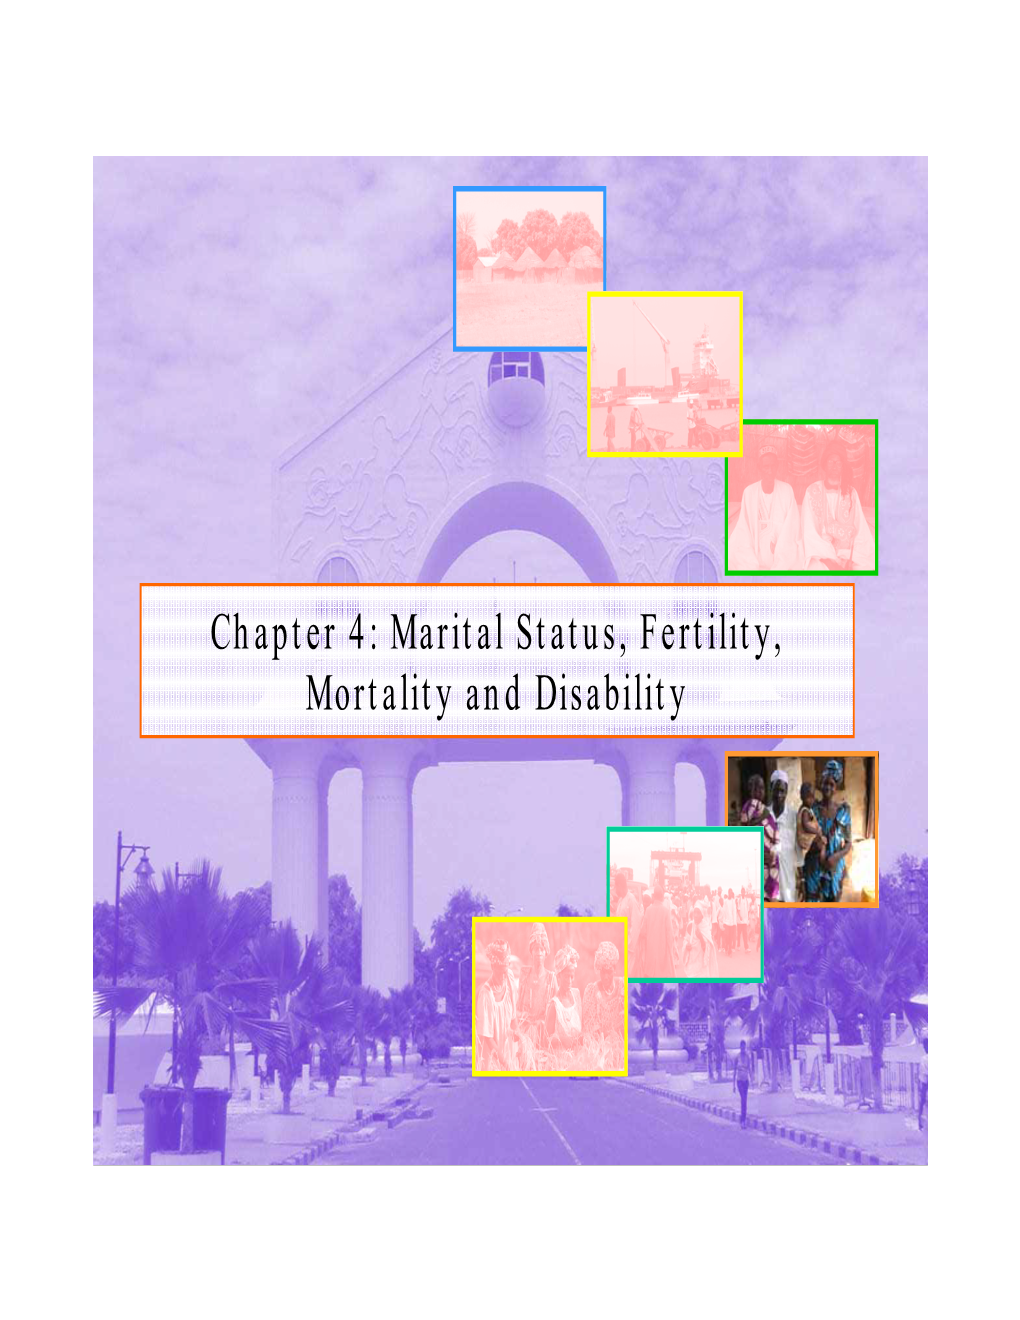 Chapter 4: Marital Status, Fertility, Mortality and Disability